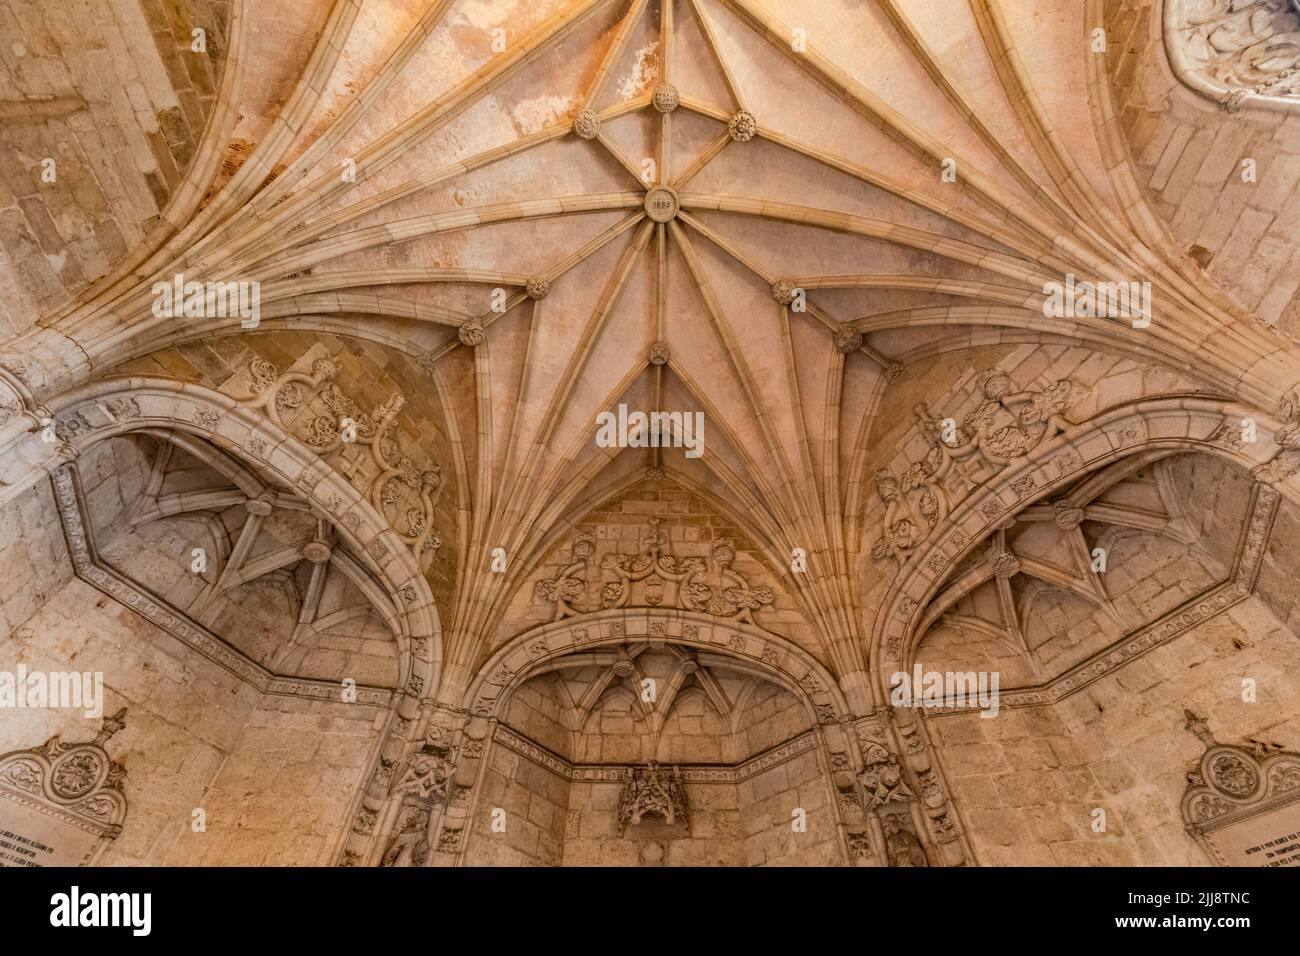 The magnificently decorated vaulted ceiling in the World Heritage Monastery of Jeronimos Monastery in Belem, Lisbon, Portugal Stock Photo